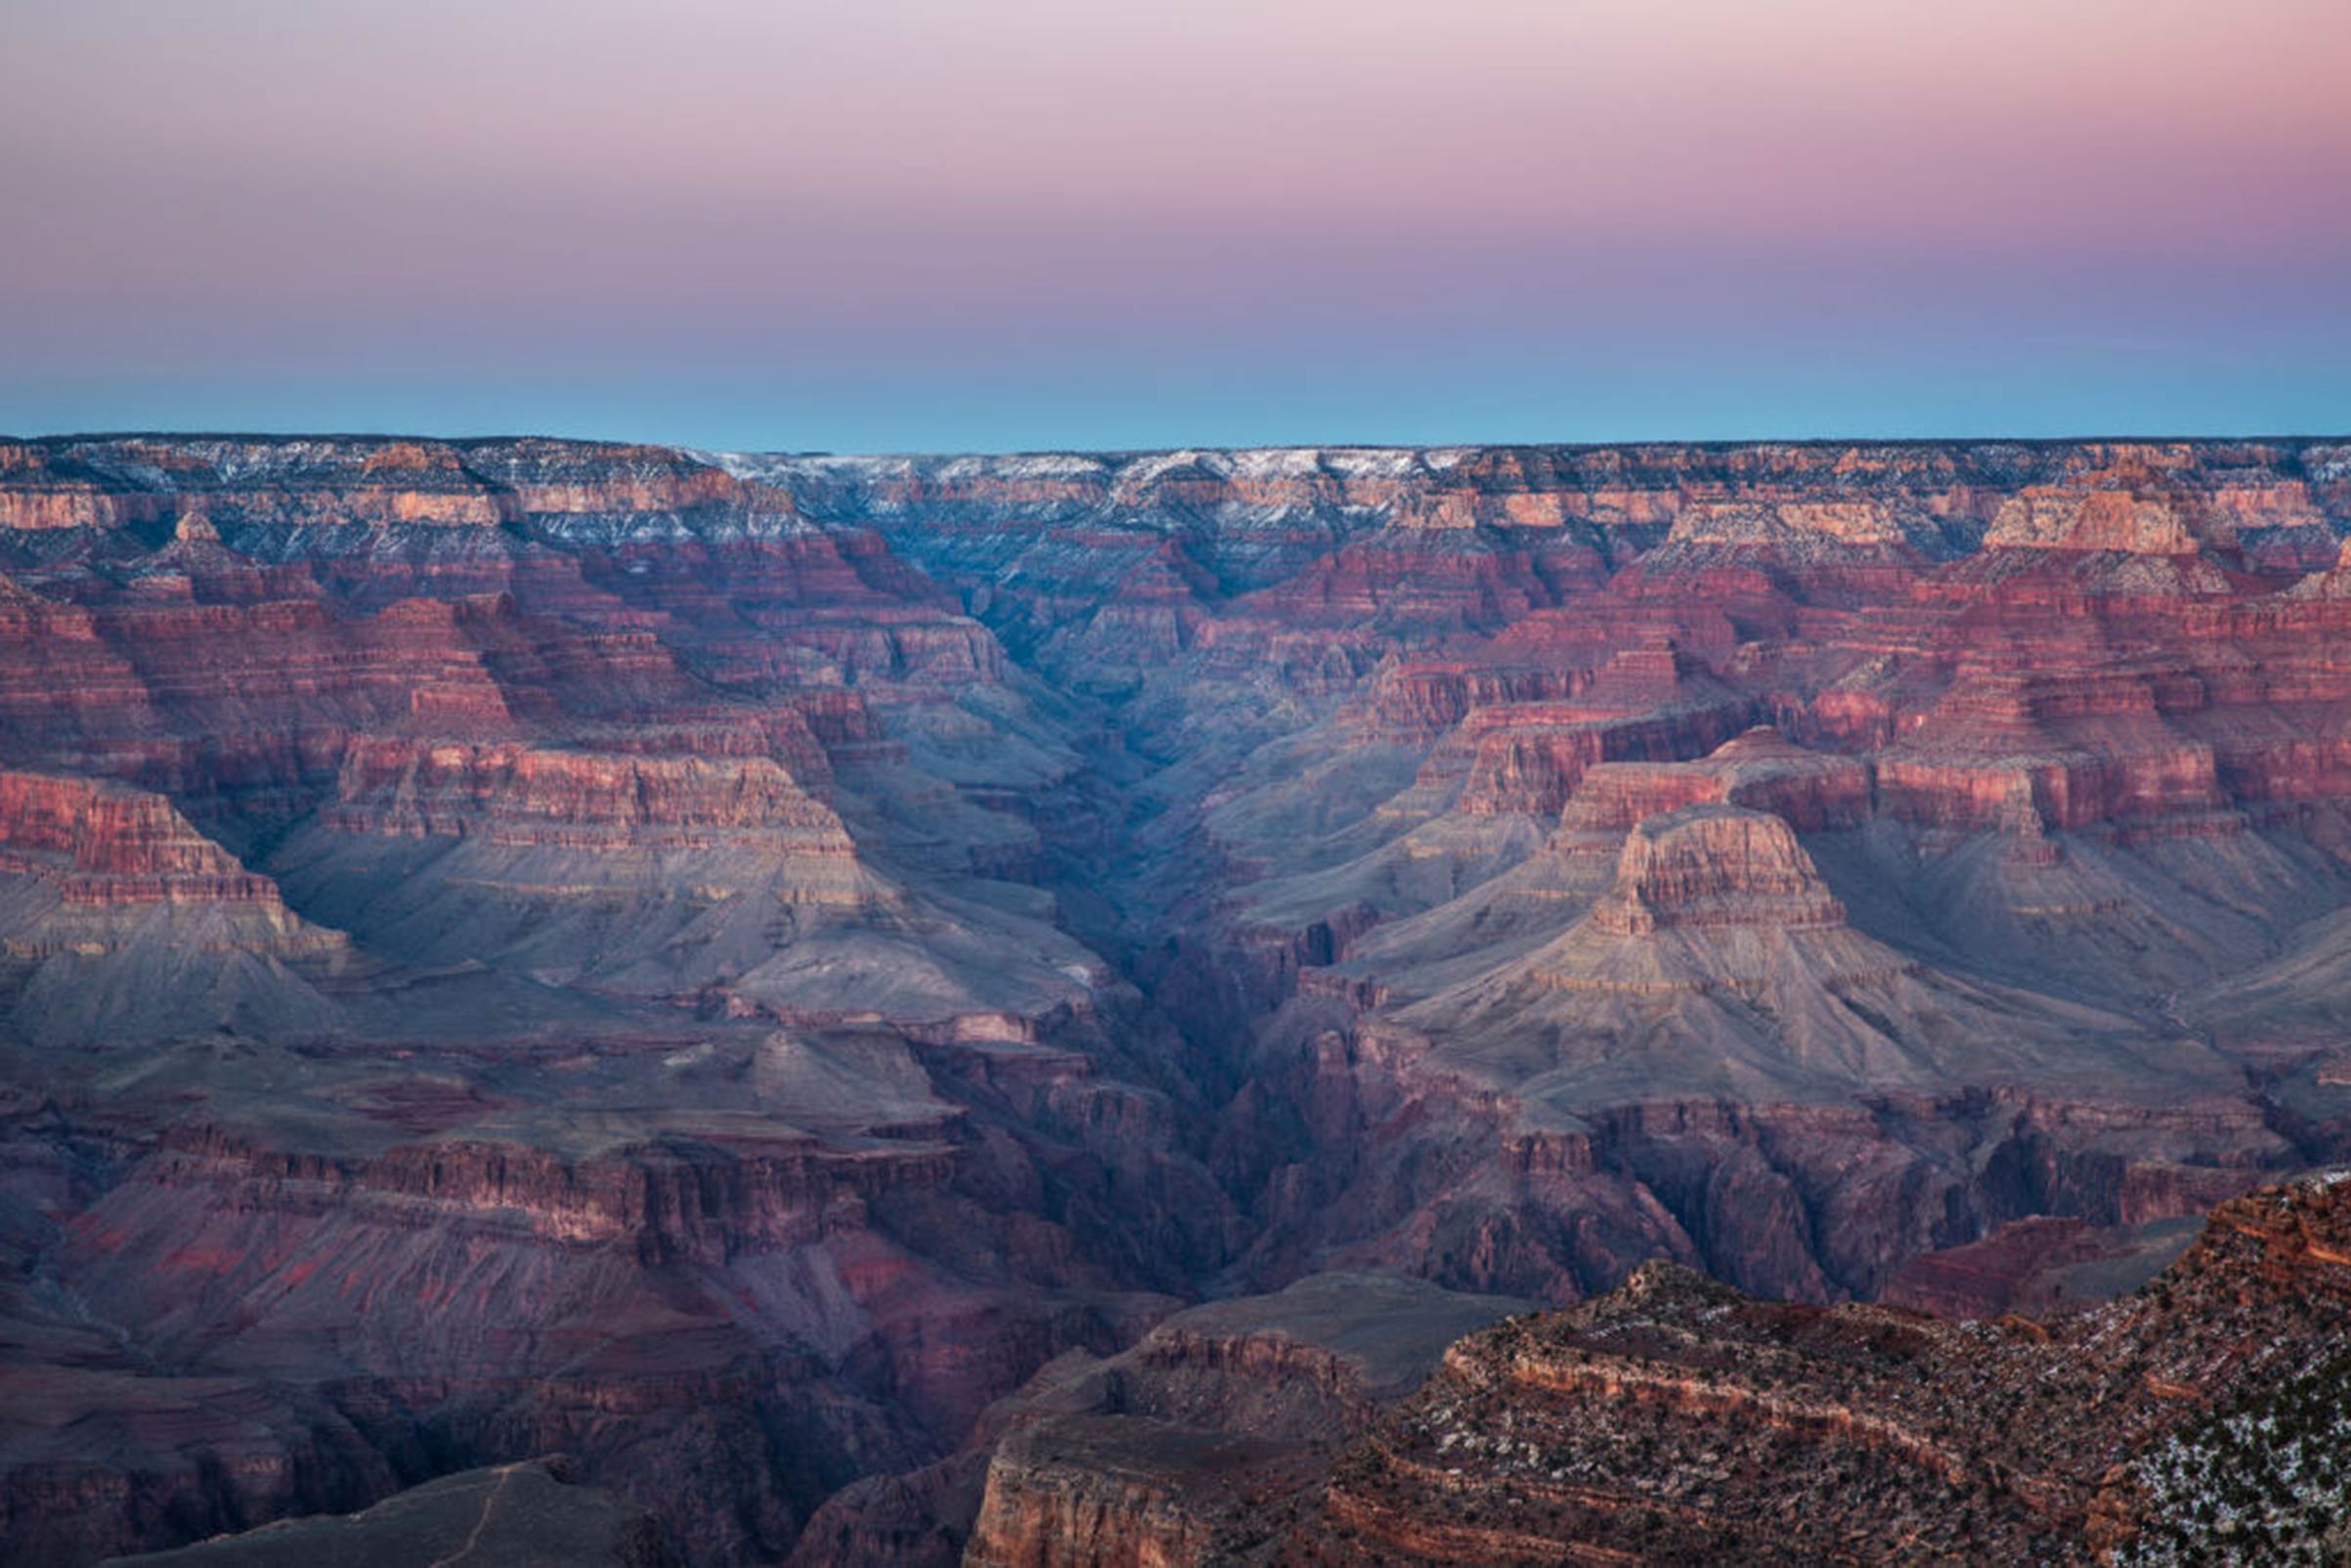 A view of the Grand Canyon just after sunset from the South Rim on Feb. 8, 2019, in Grand Canyon National Park in Arizona. (George Rose—Getty Images)